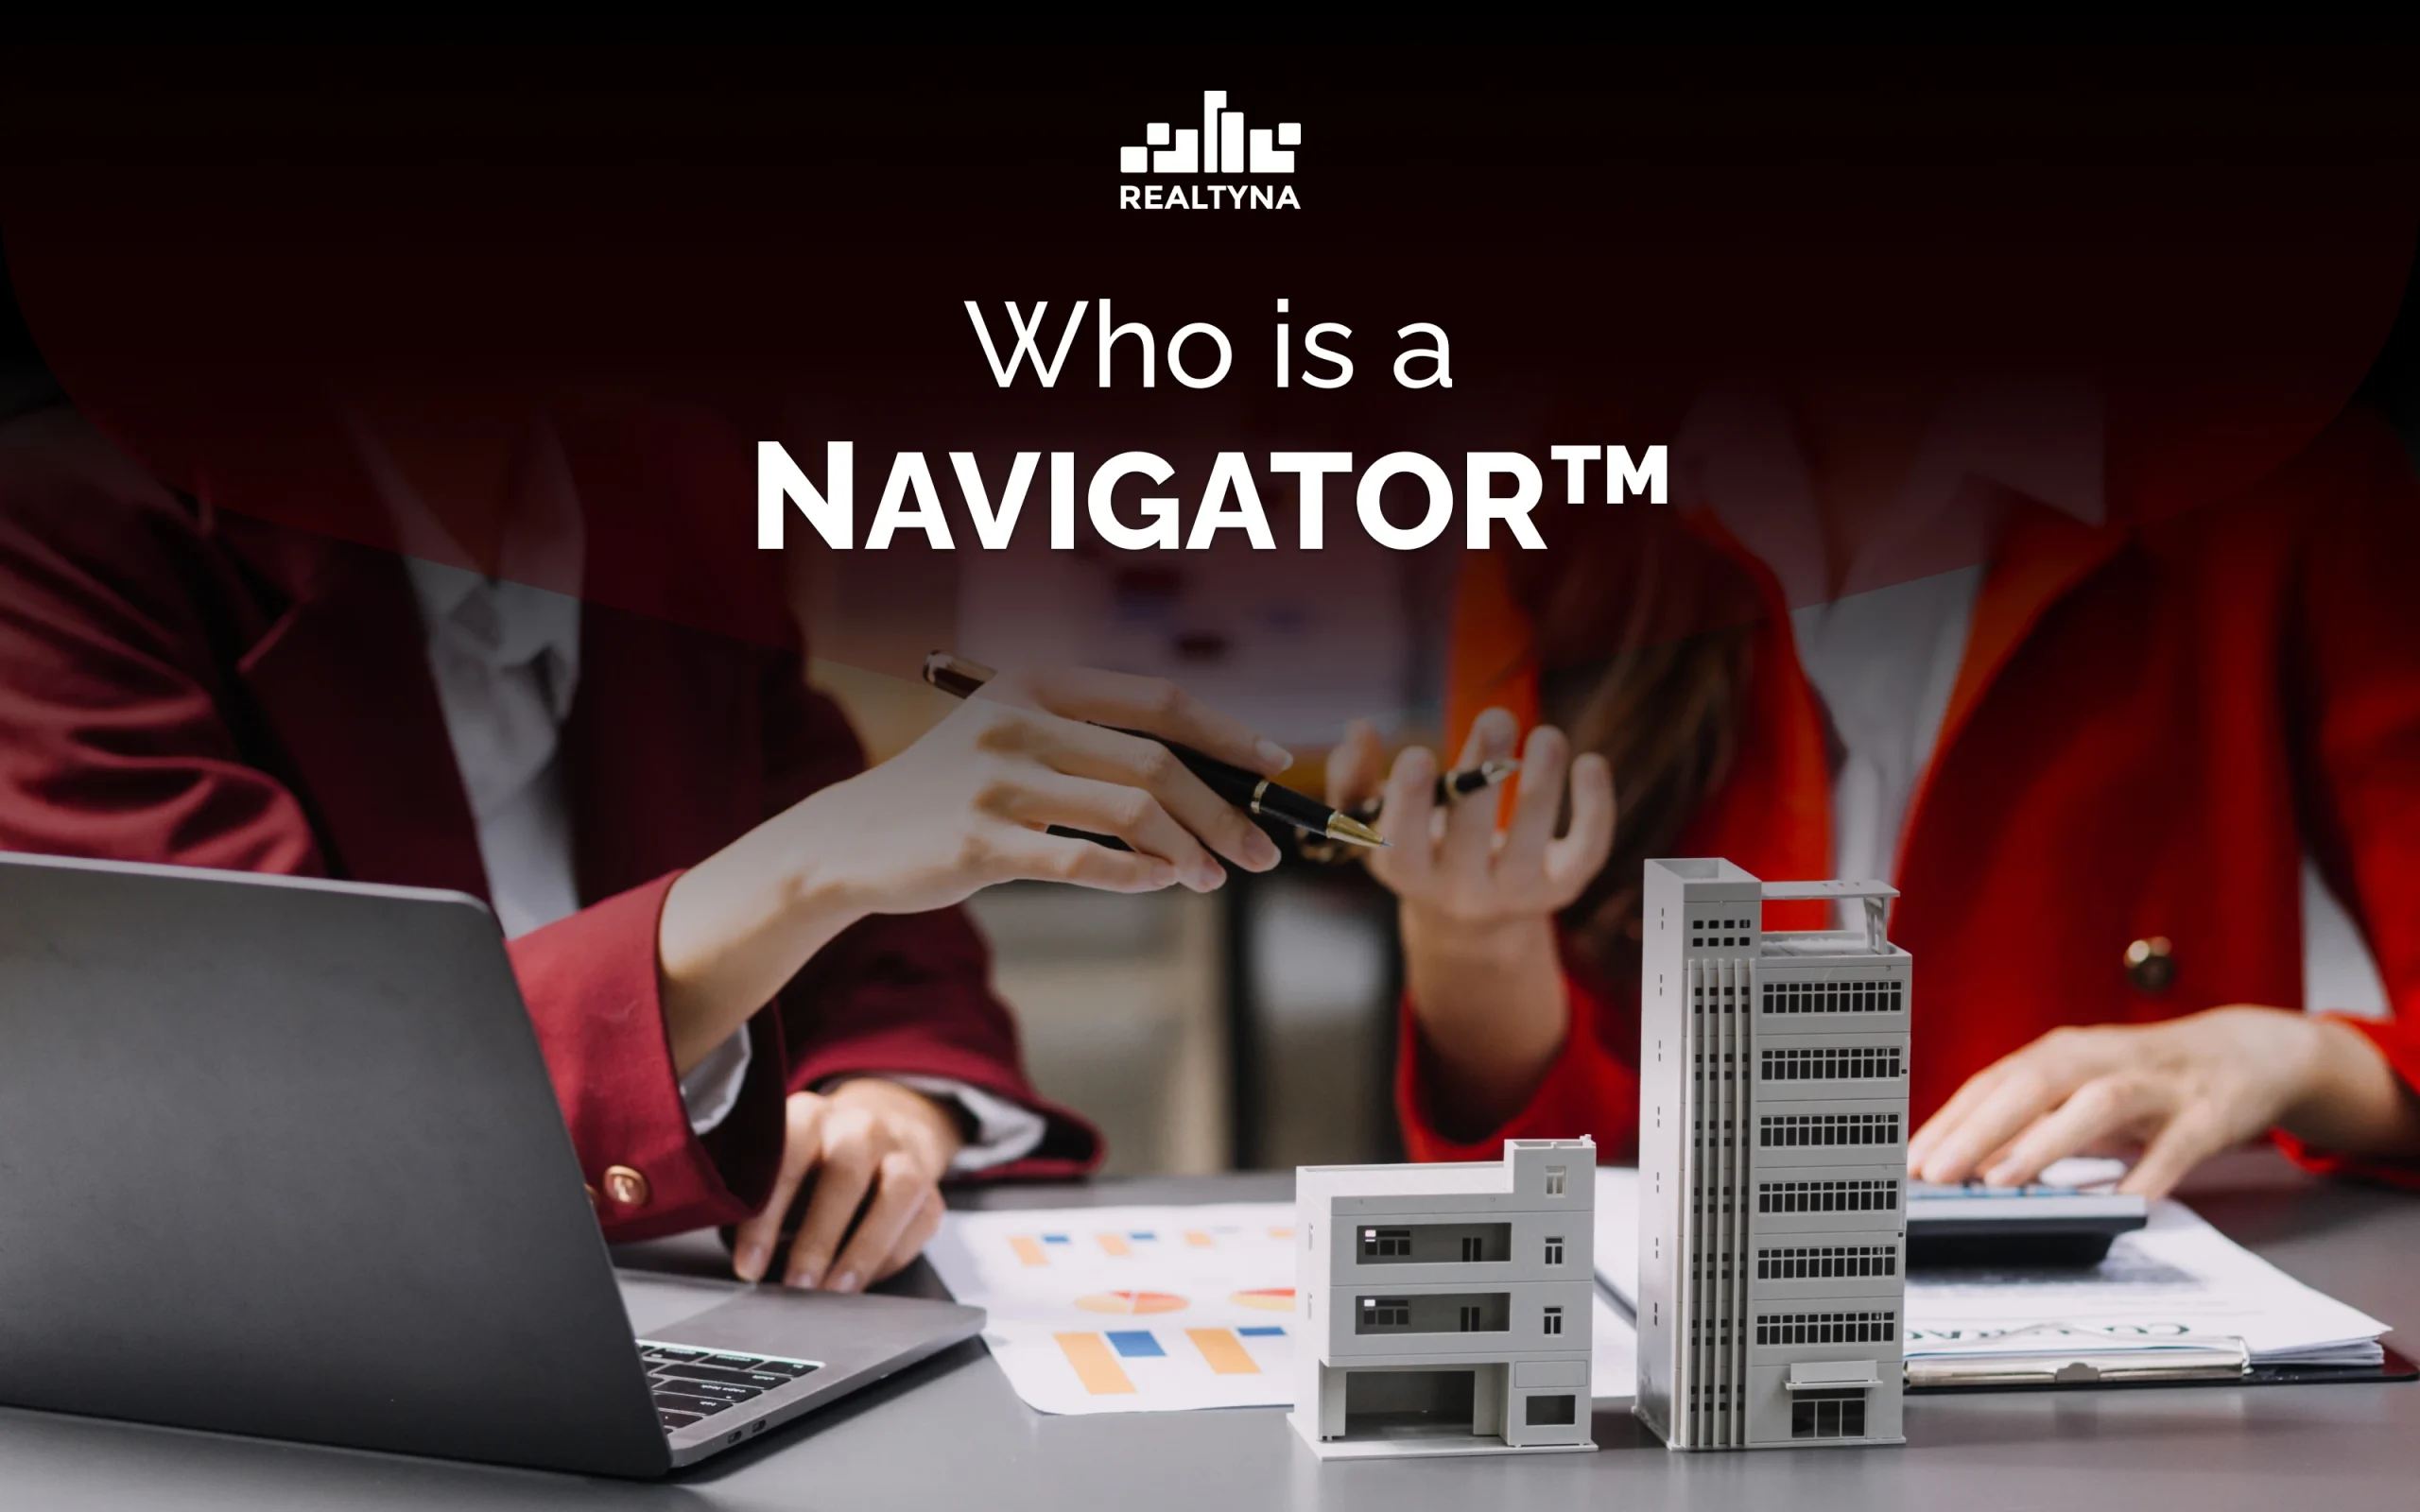 Who is a NAVIGATOR